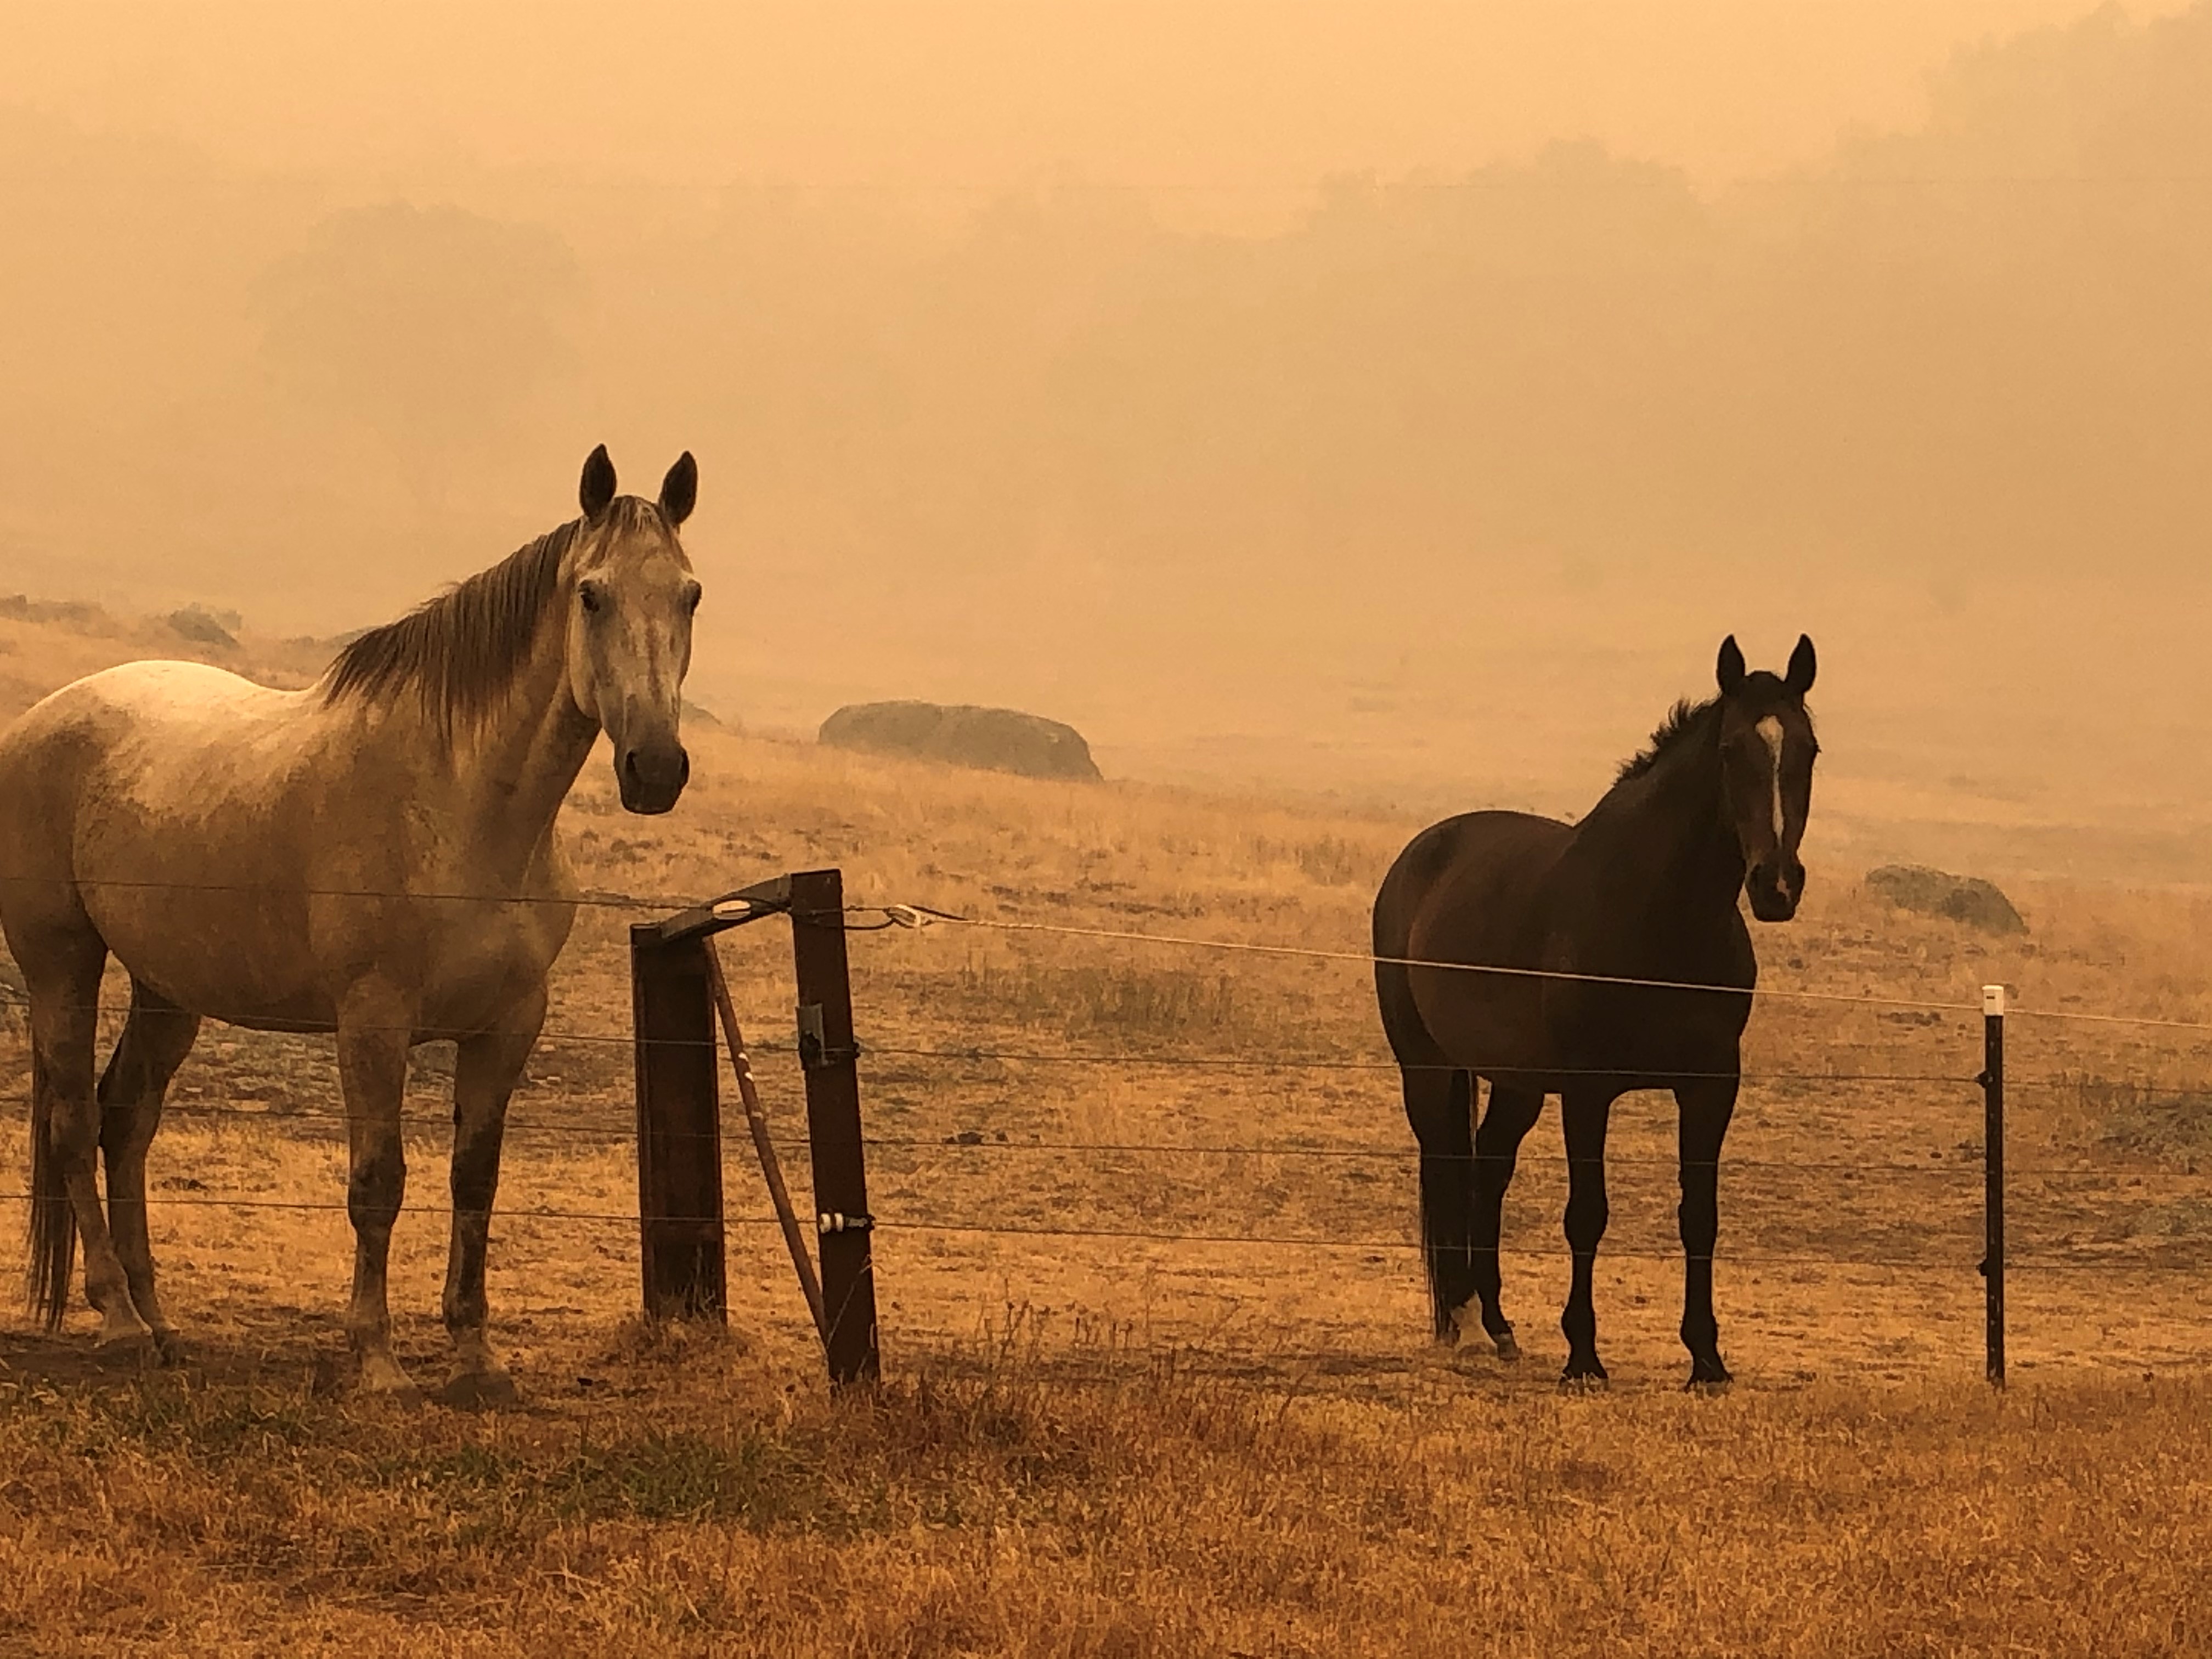 International Equestrian community comes together to support Australian fire relief